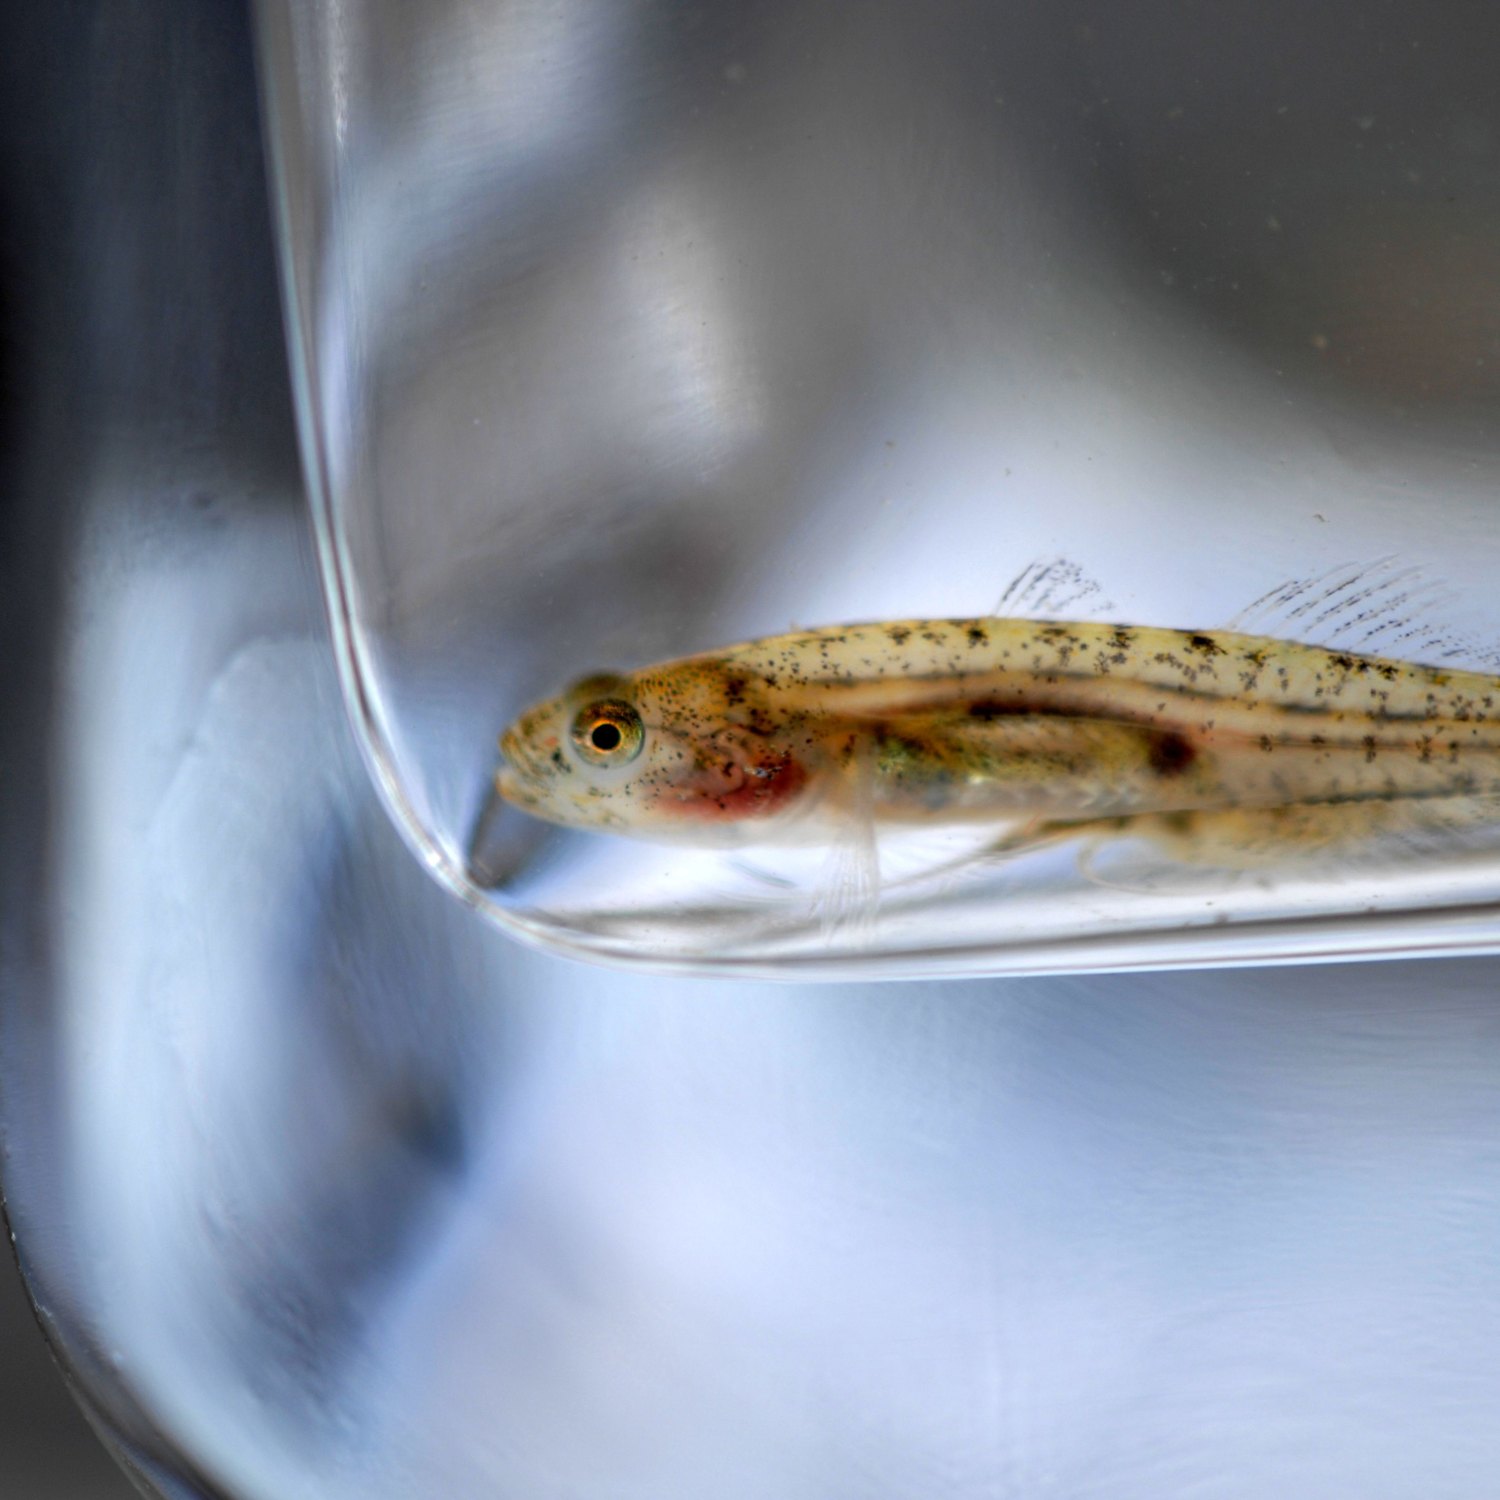 Tidewater Goby